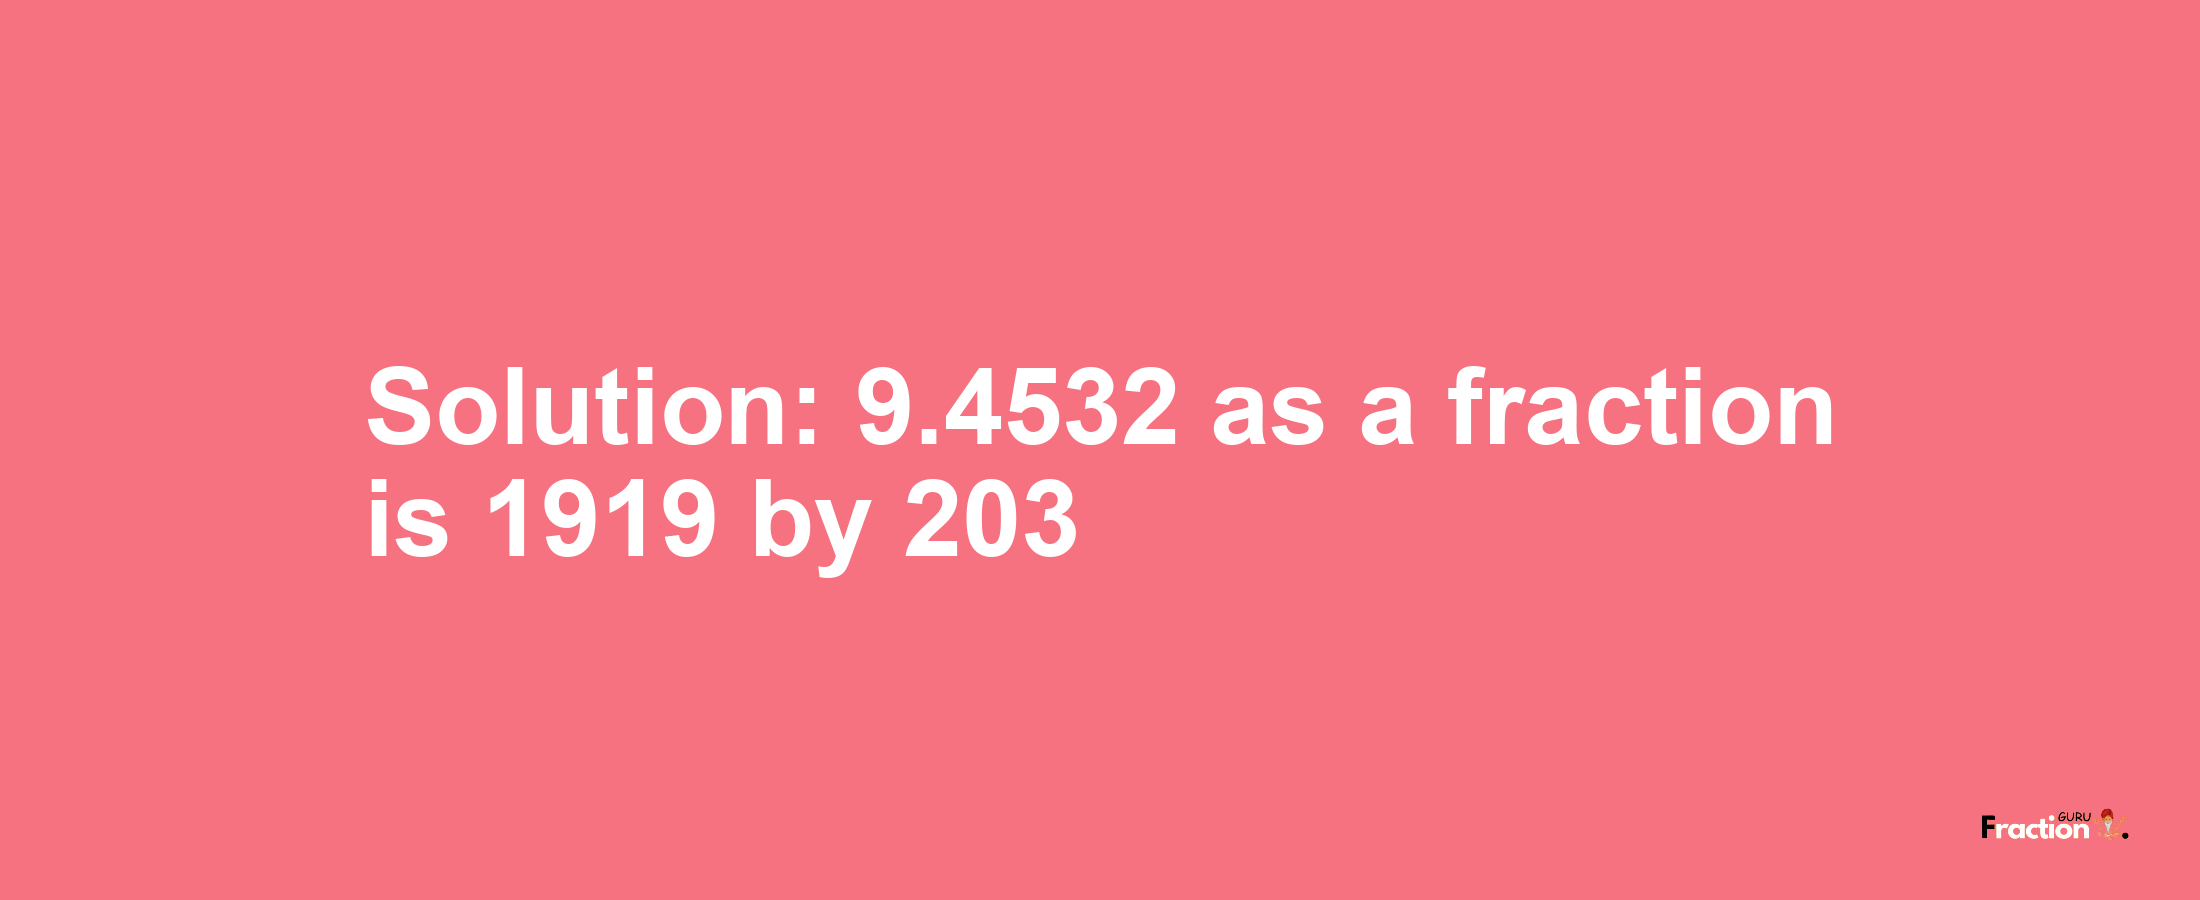 Solution:9.4532 as a fraction is 1919/203